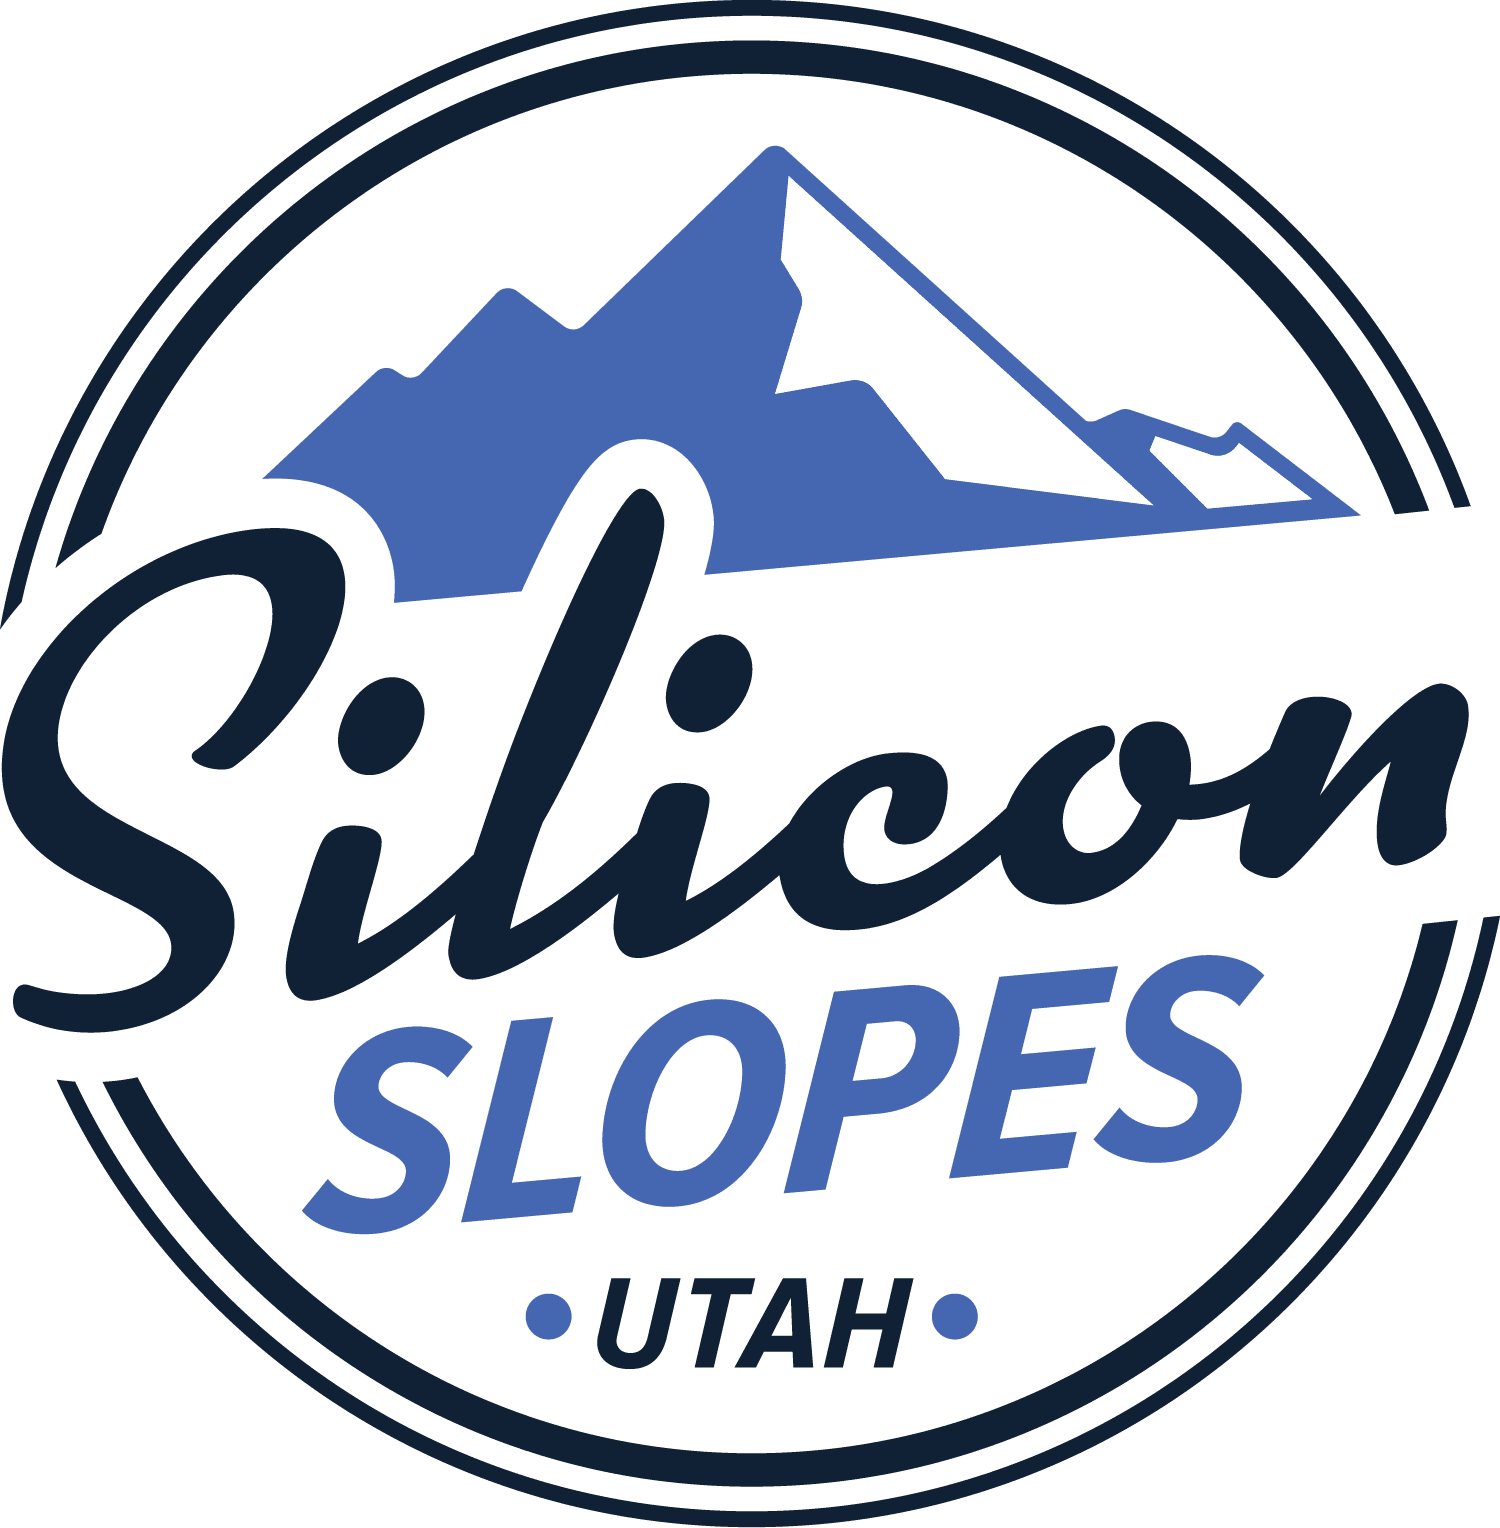 Tech opportunities on silicon slopes utah